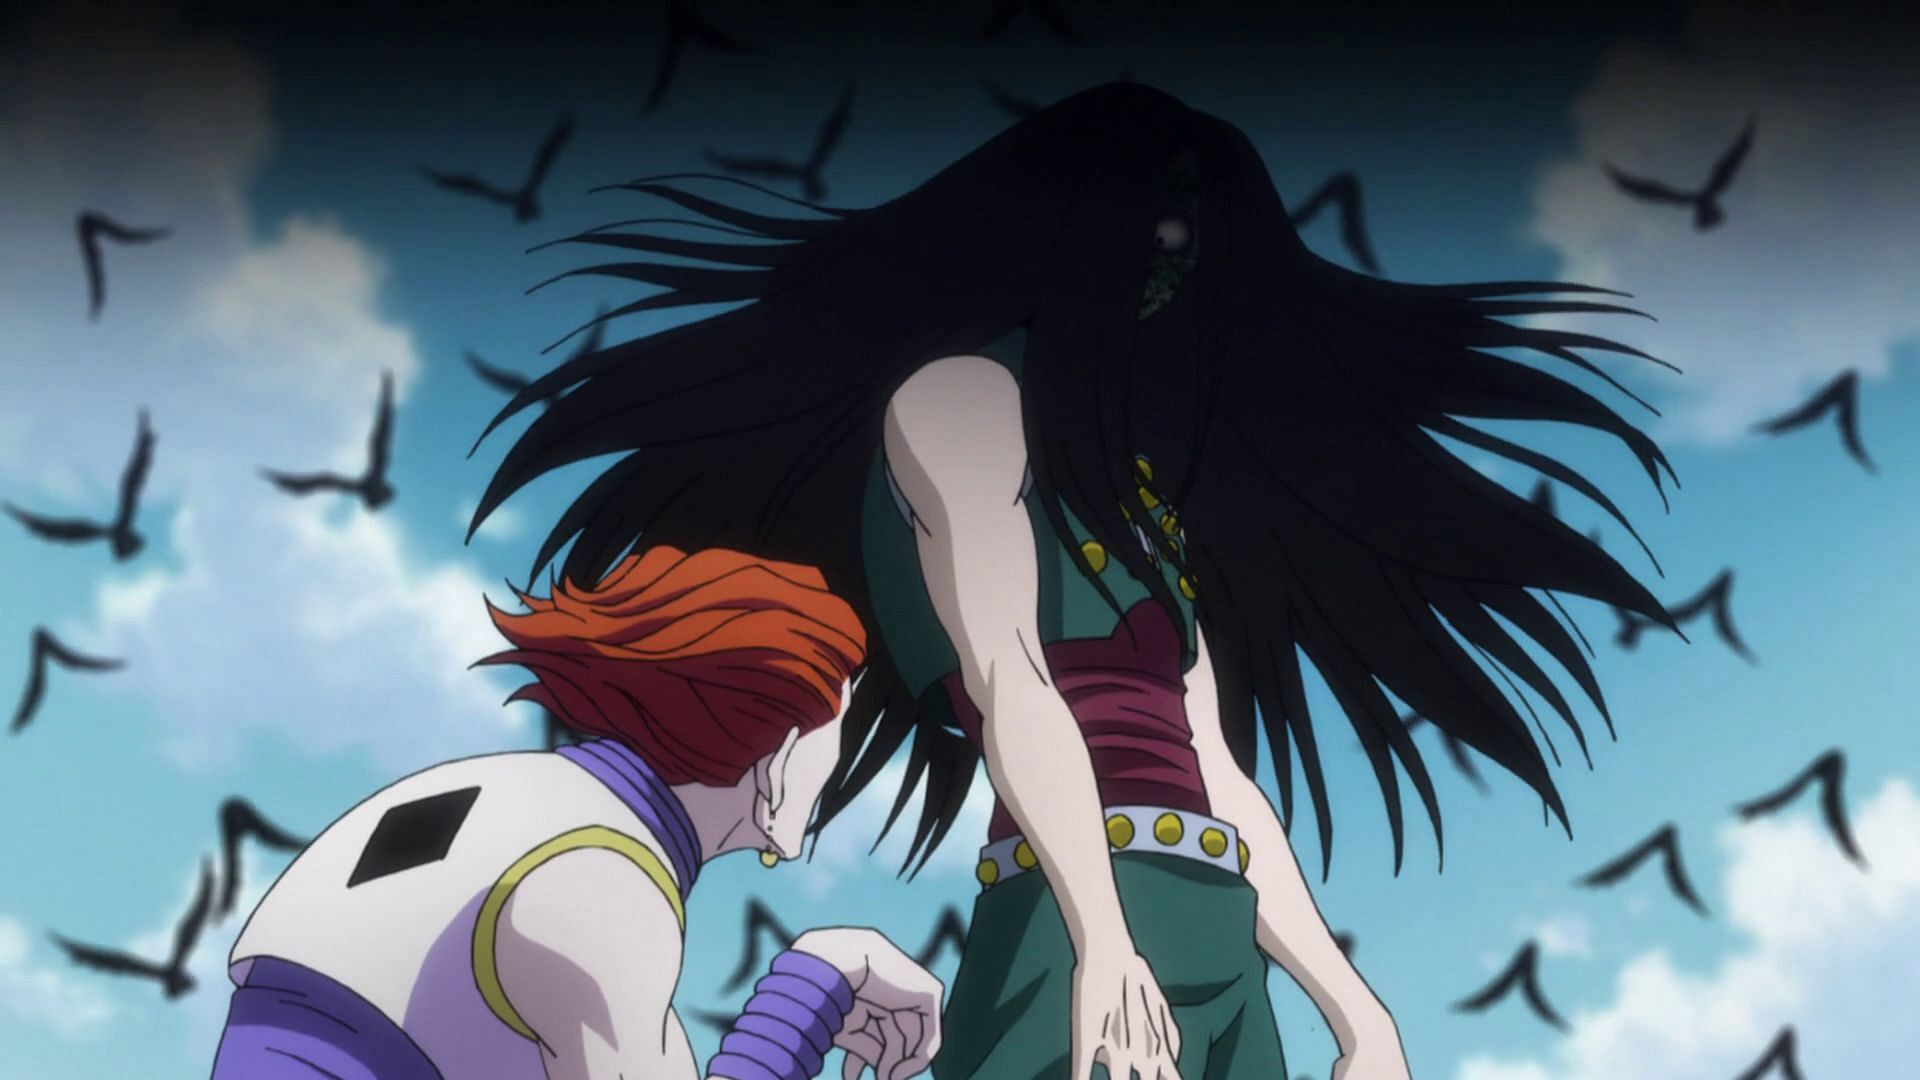 Meruem vs Netero , hands down one of the best anime fights ever